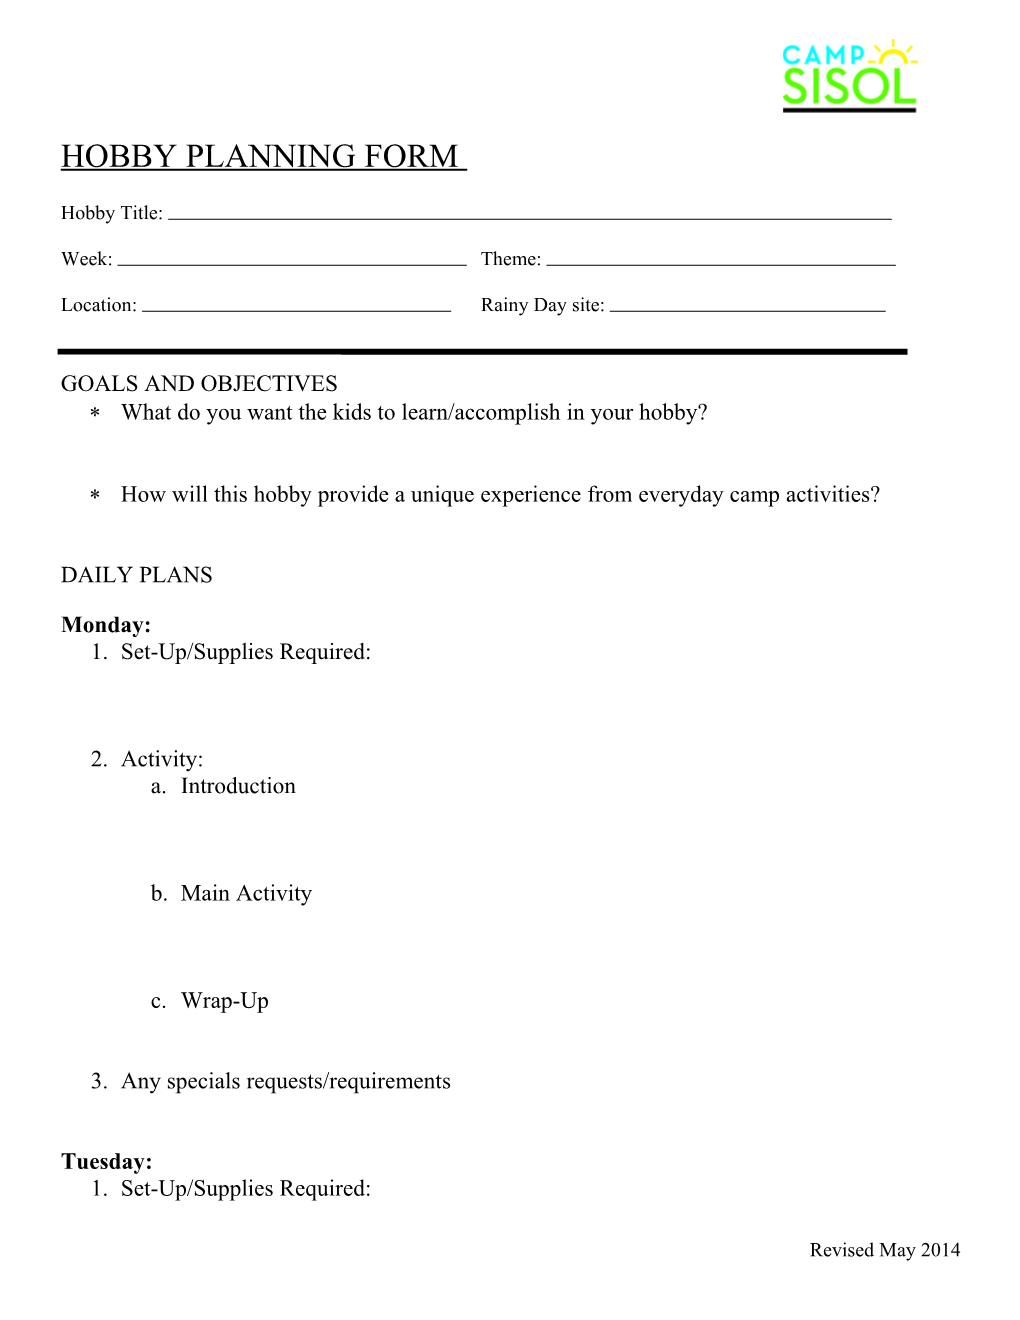 Hobby Planning Form